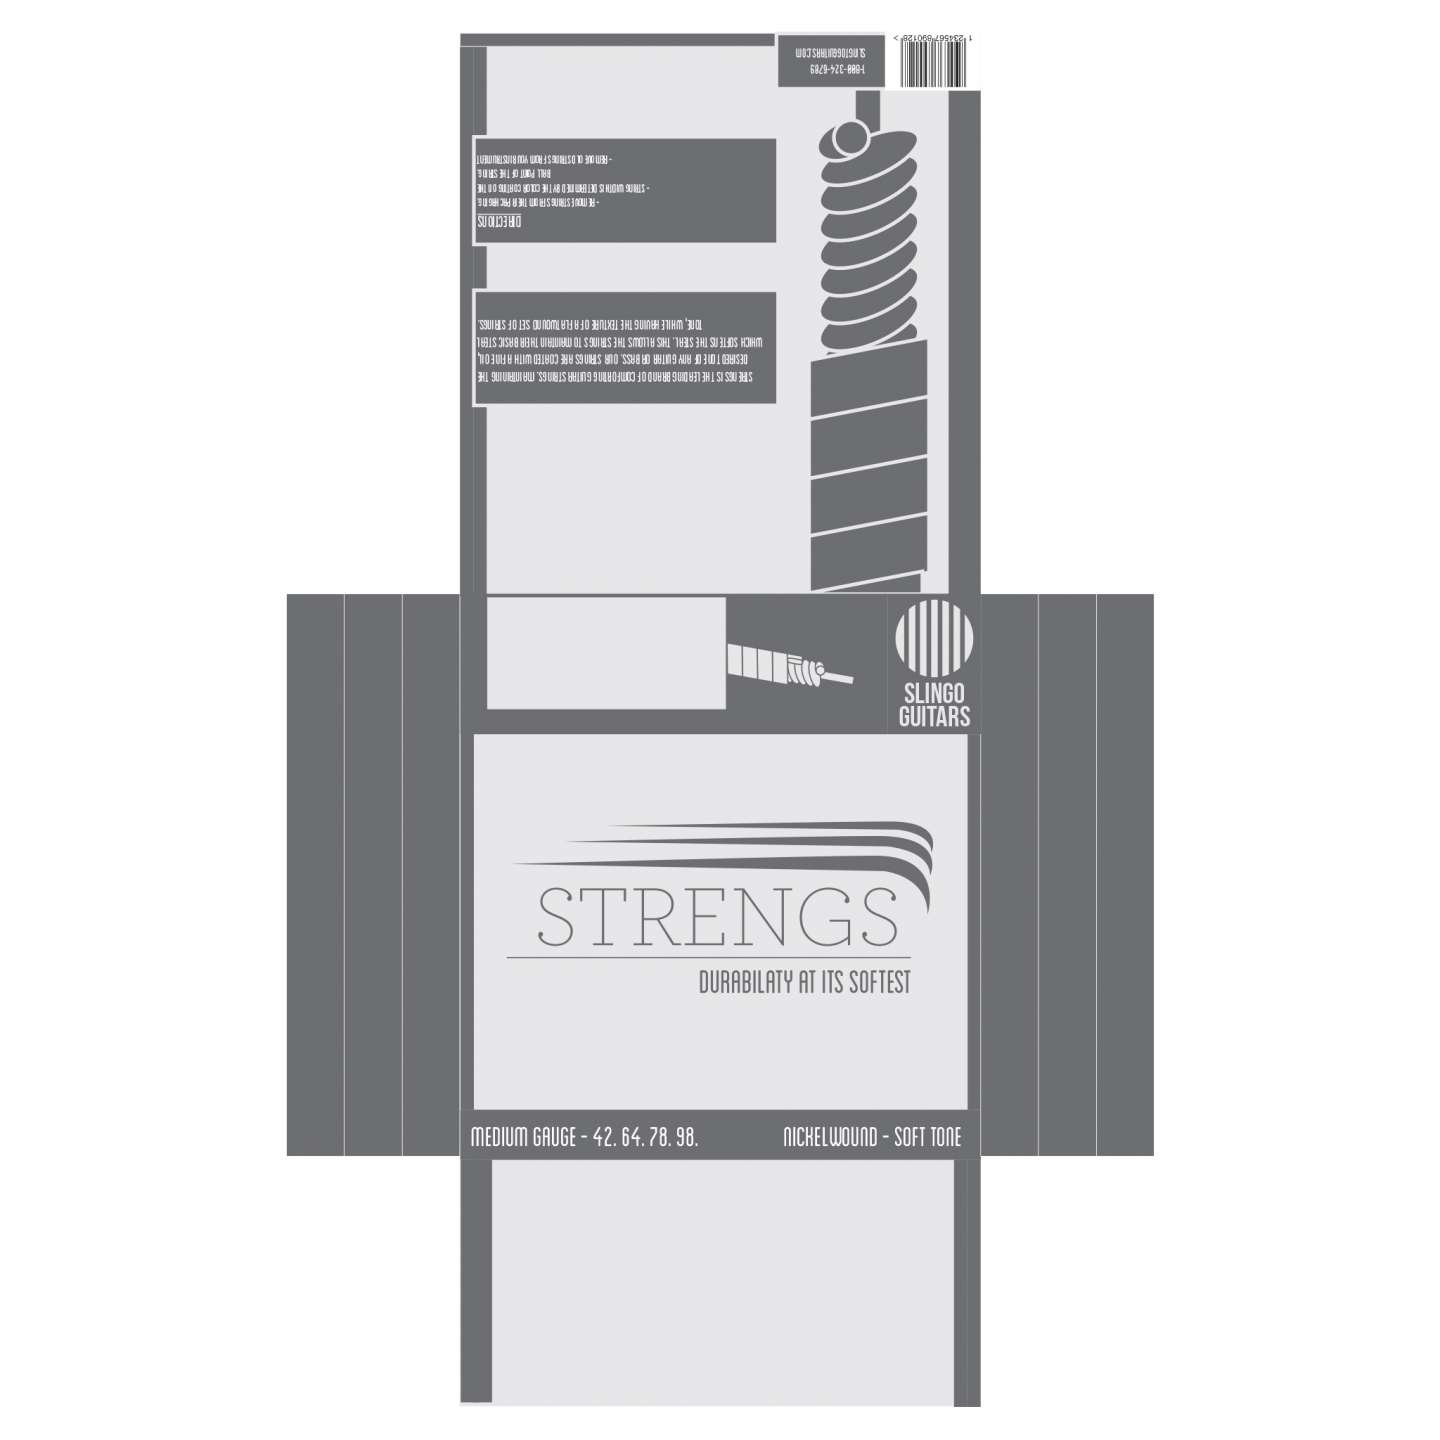 Strengs Product Design